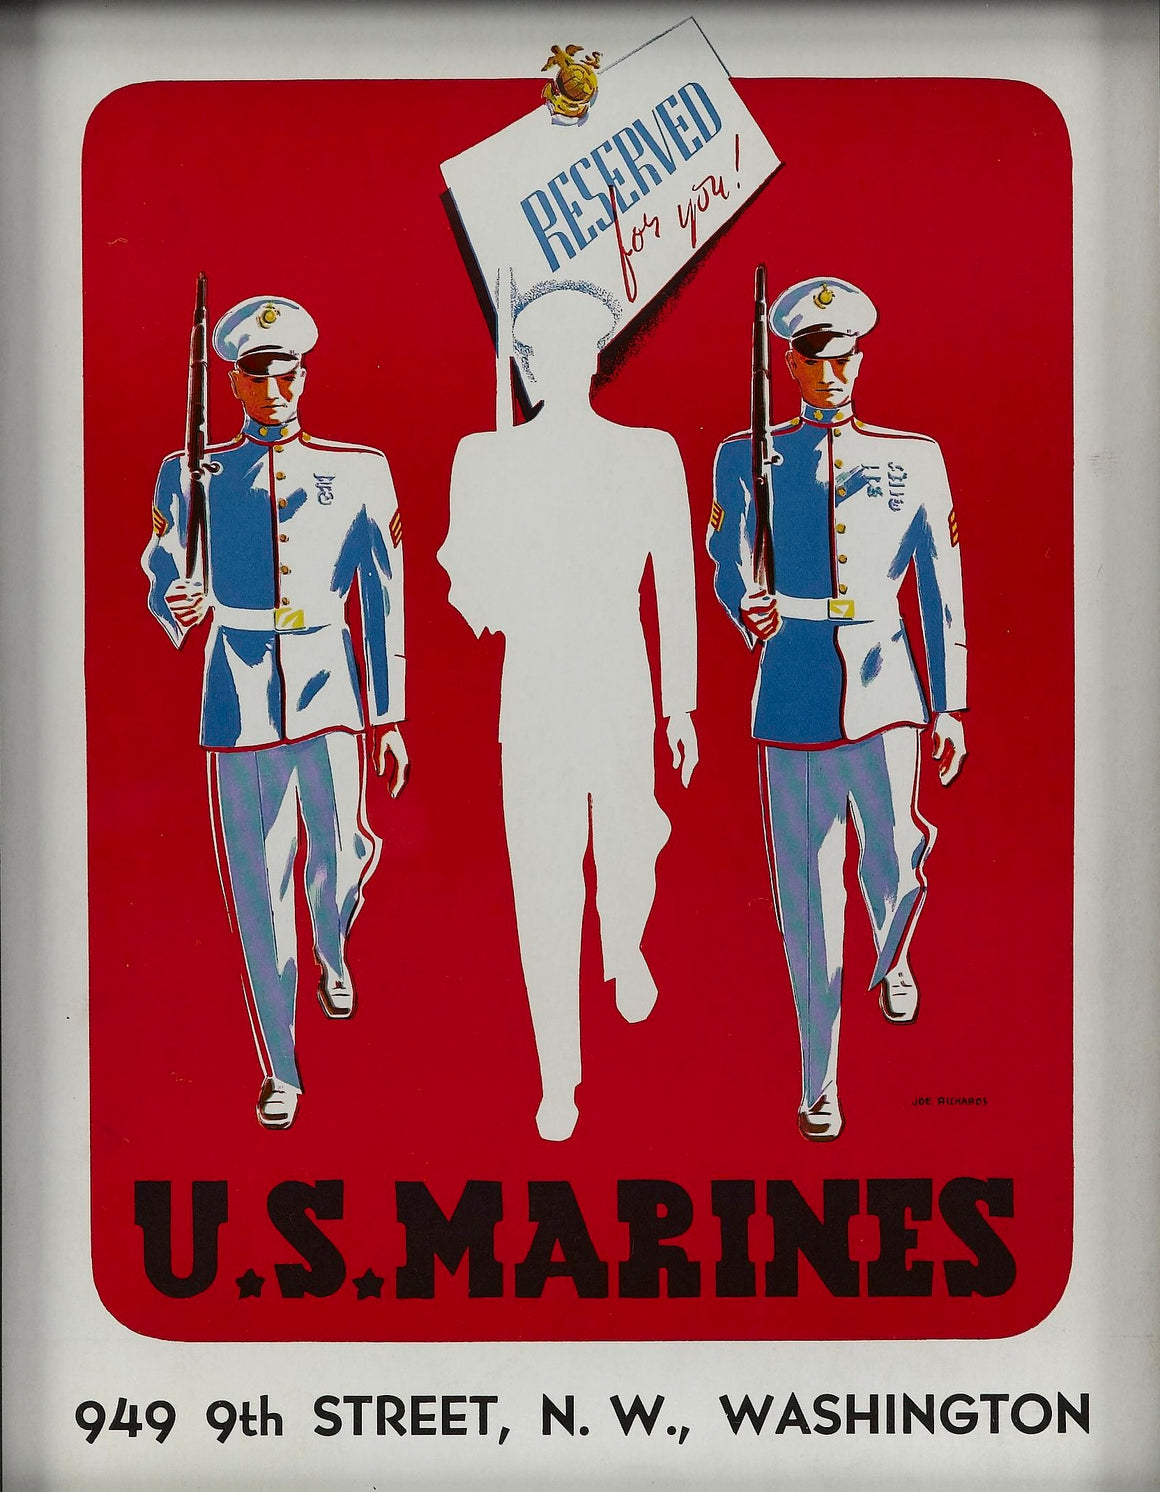 "U.S. Marines. Reserved for you!" Vintage WWII Marine Corps Recruitment Poster by Joe Richards, 1941